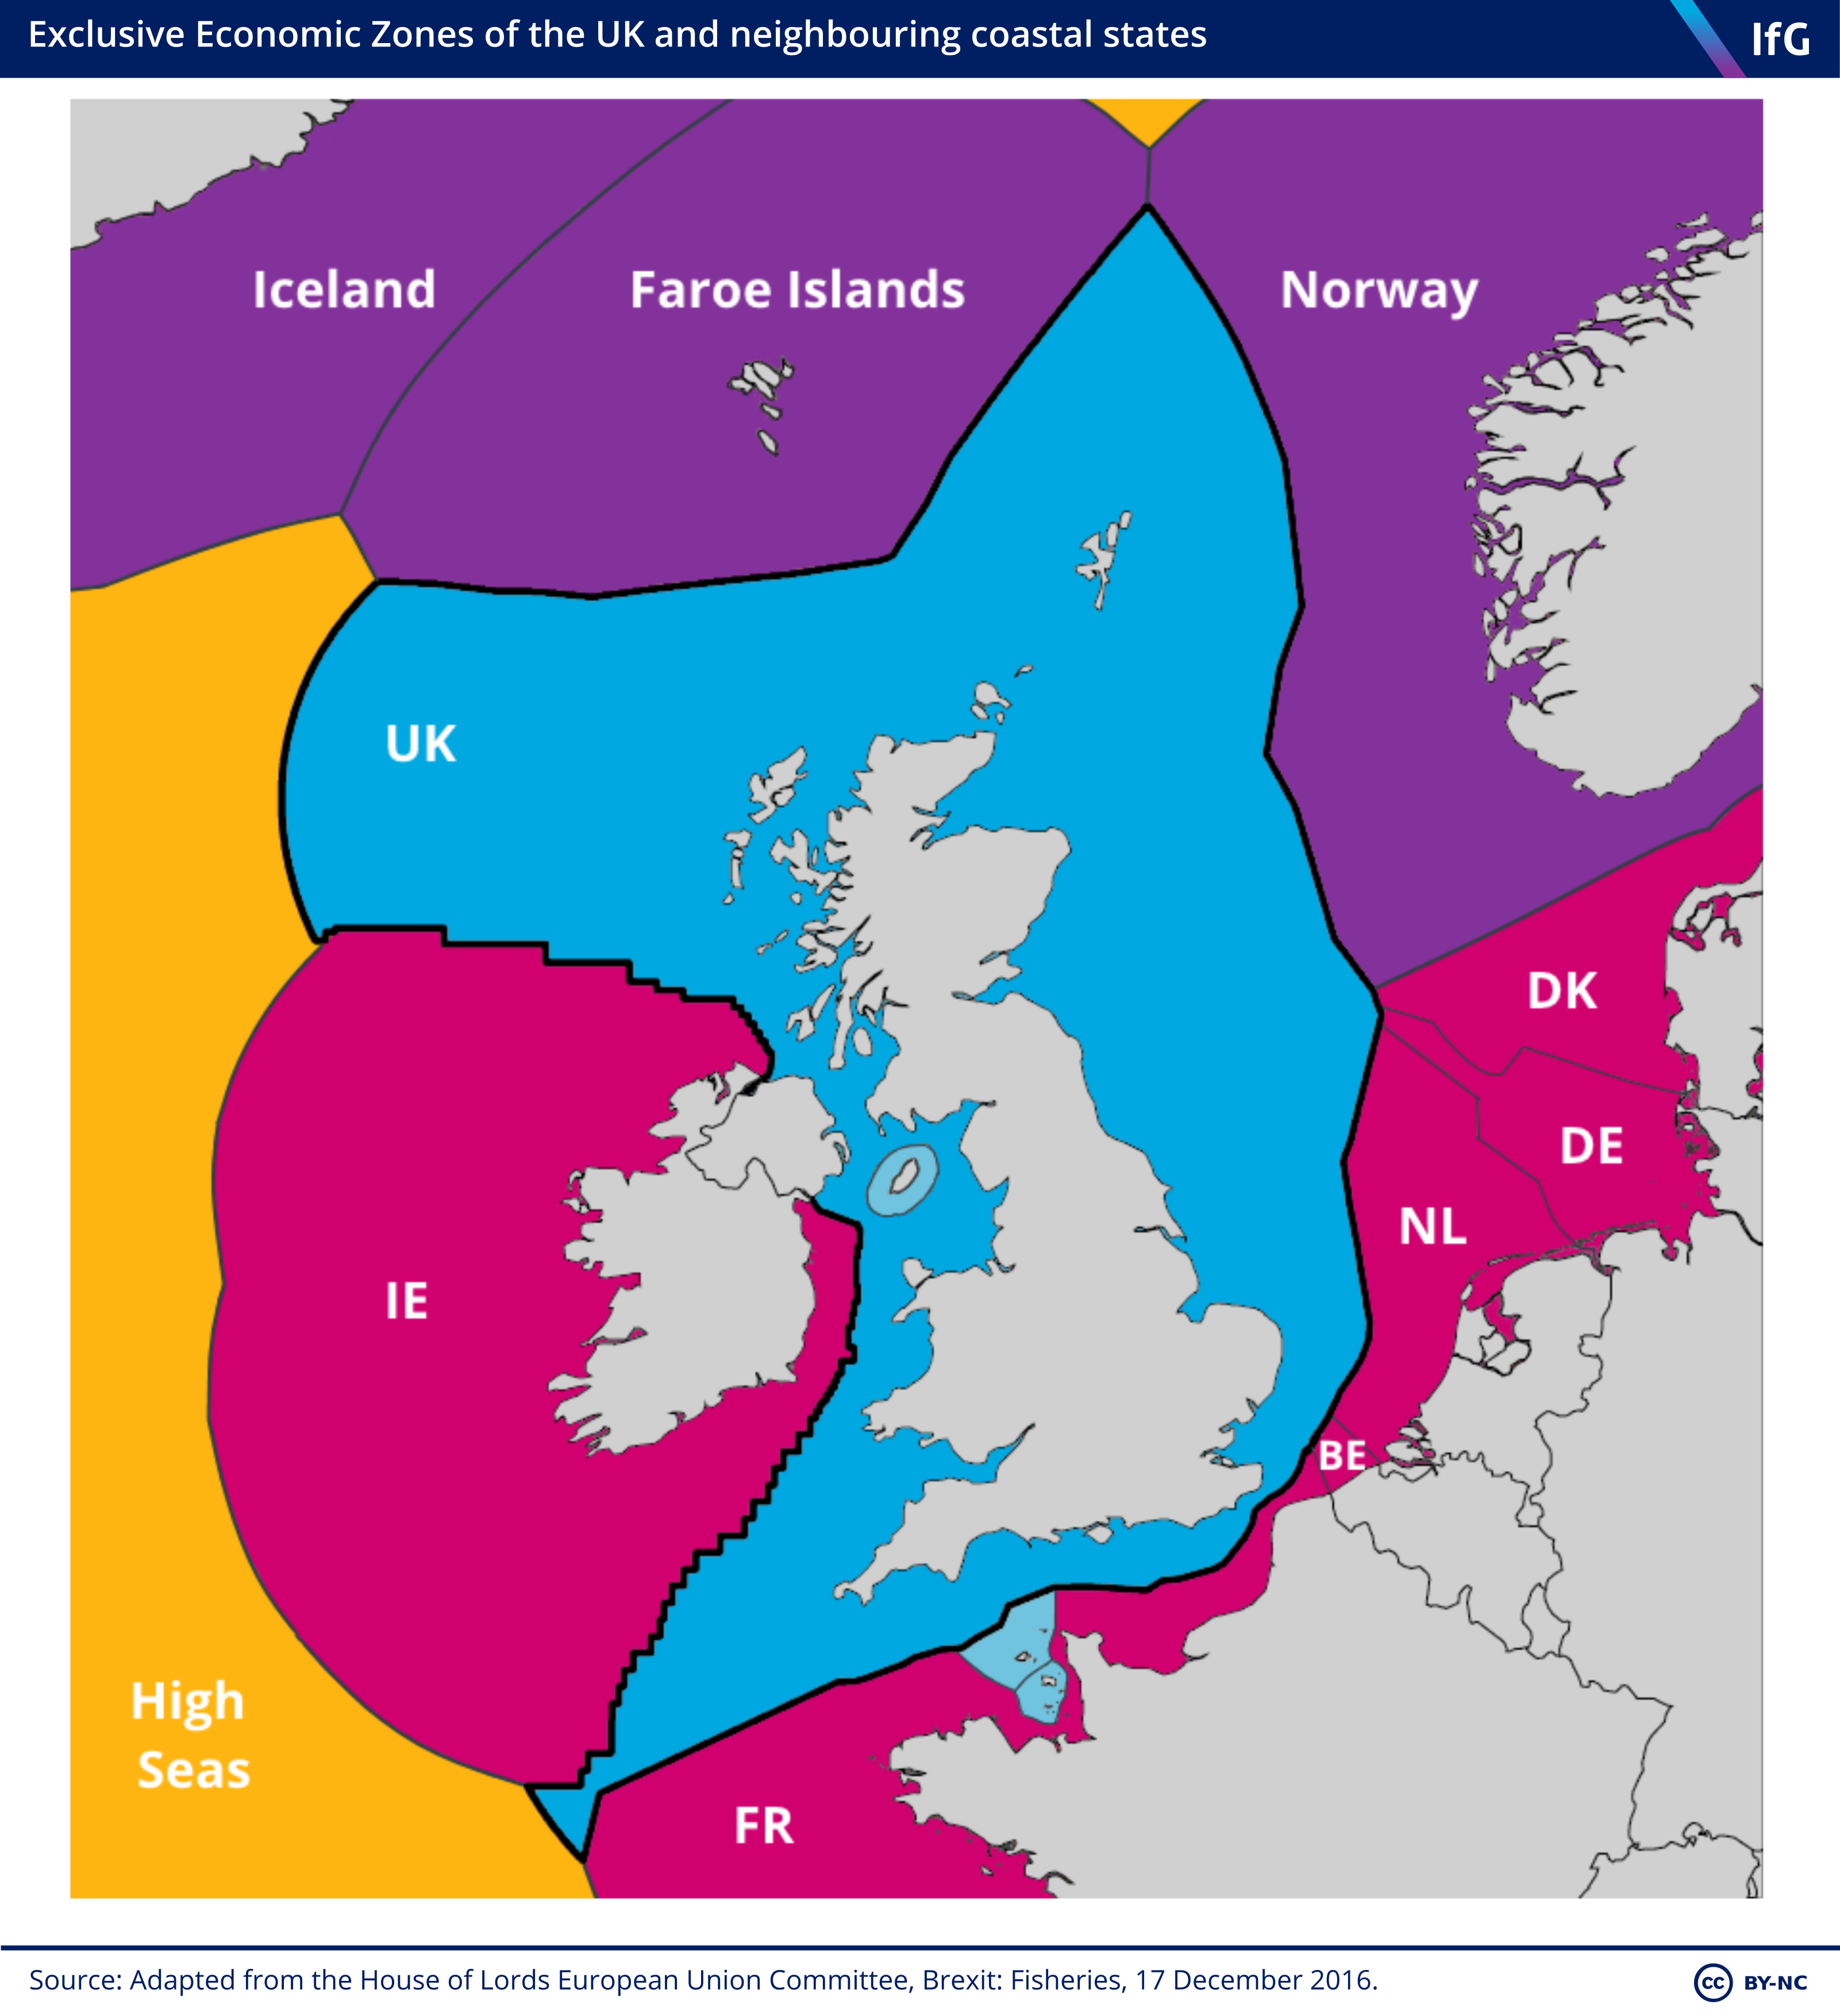 https://www.instituteforgovernment.org.uk/sites/default/files/chart-images/eez-map-2020.png